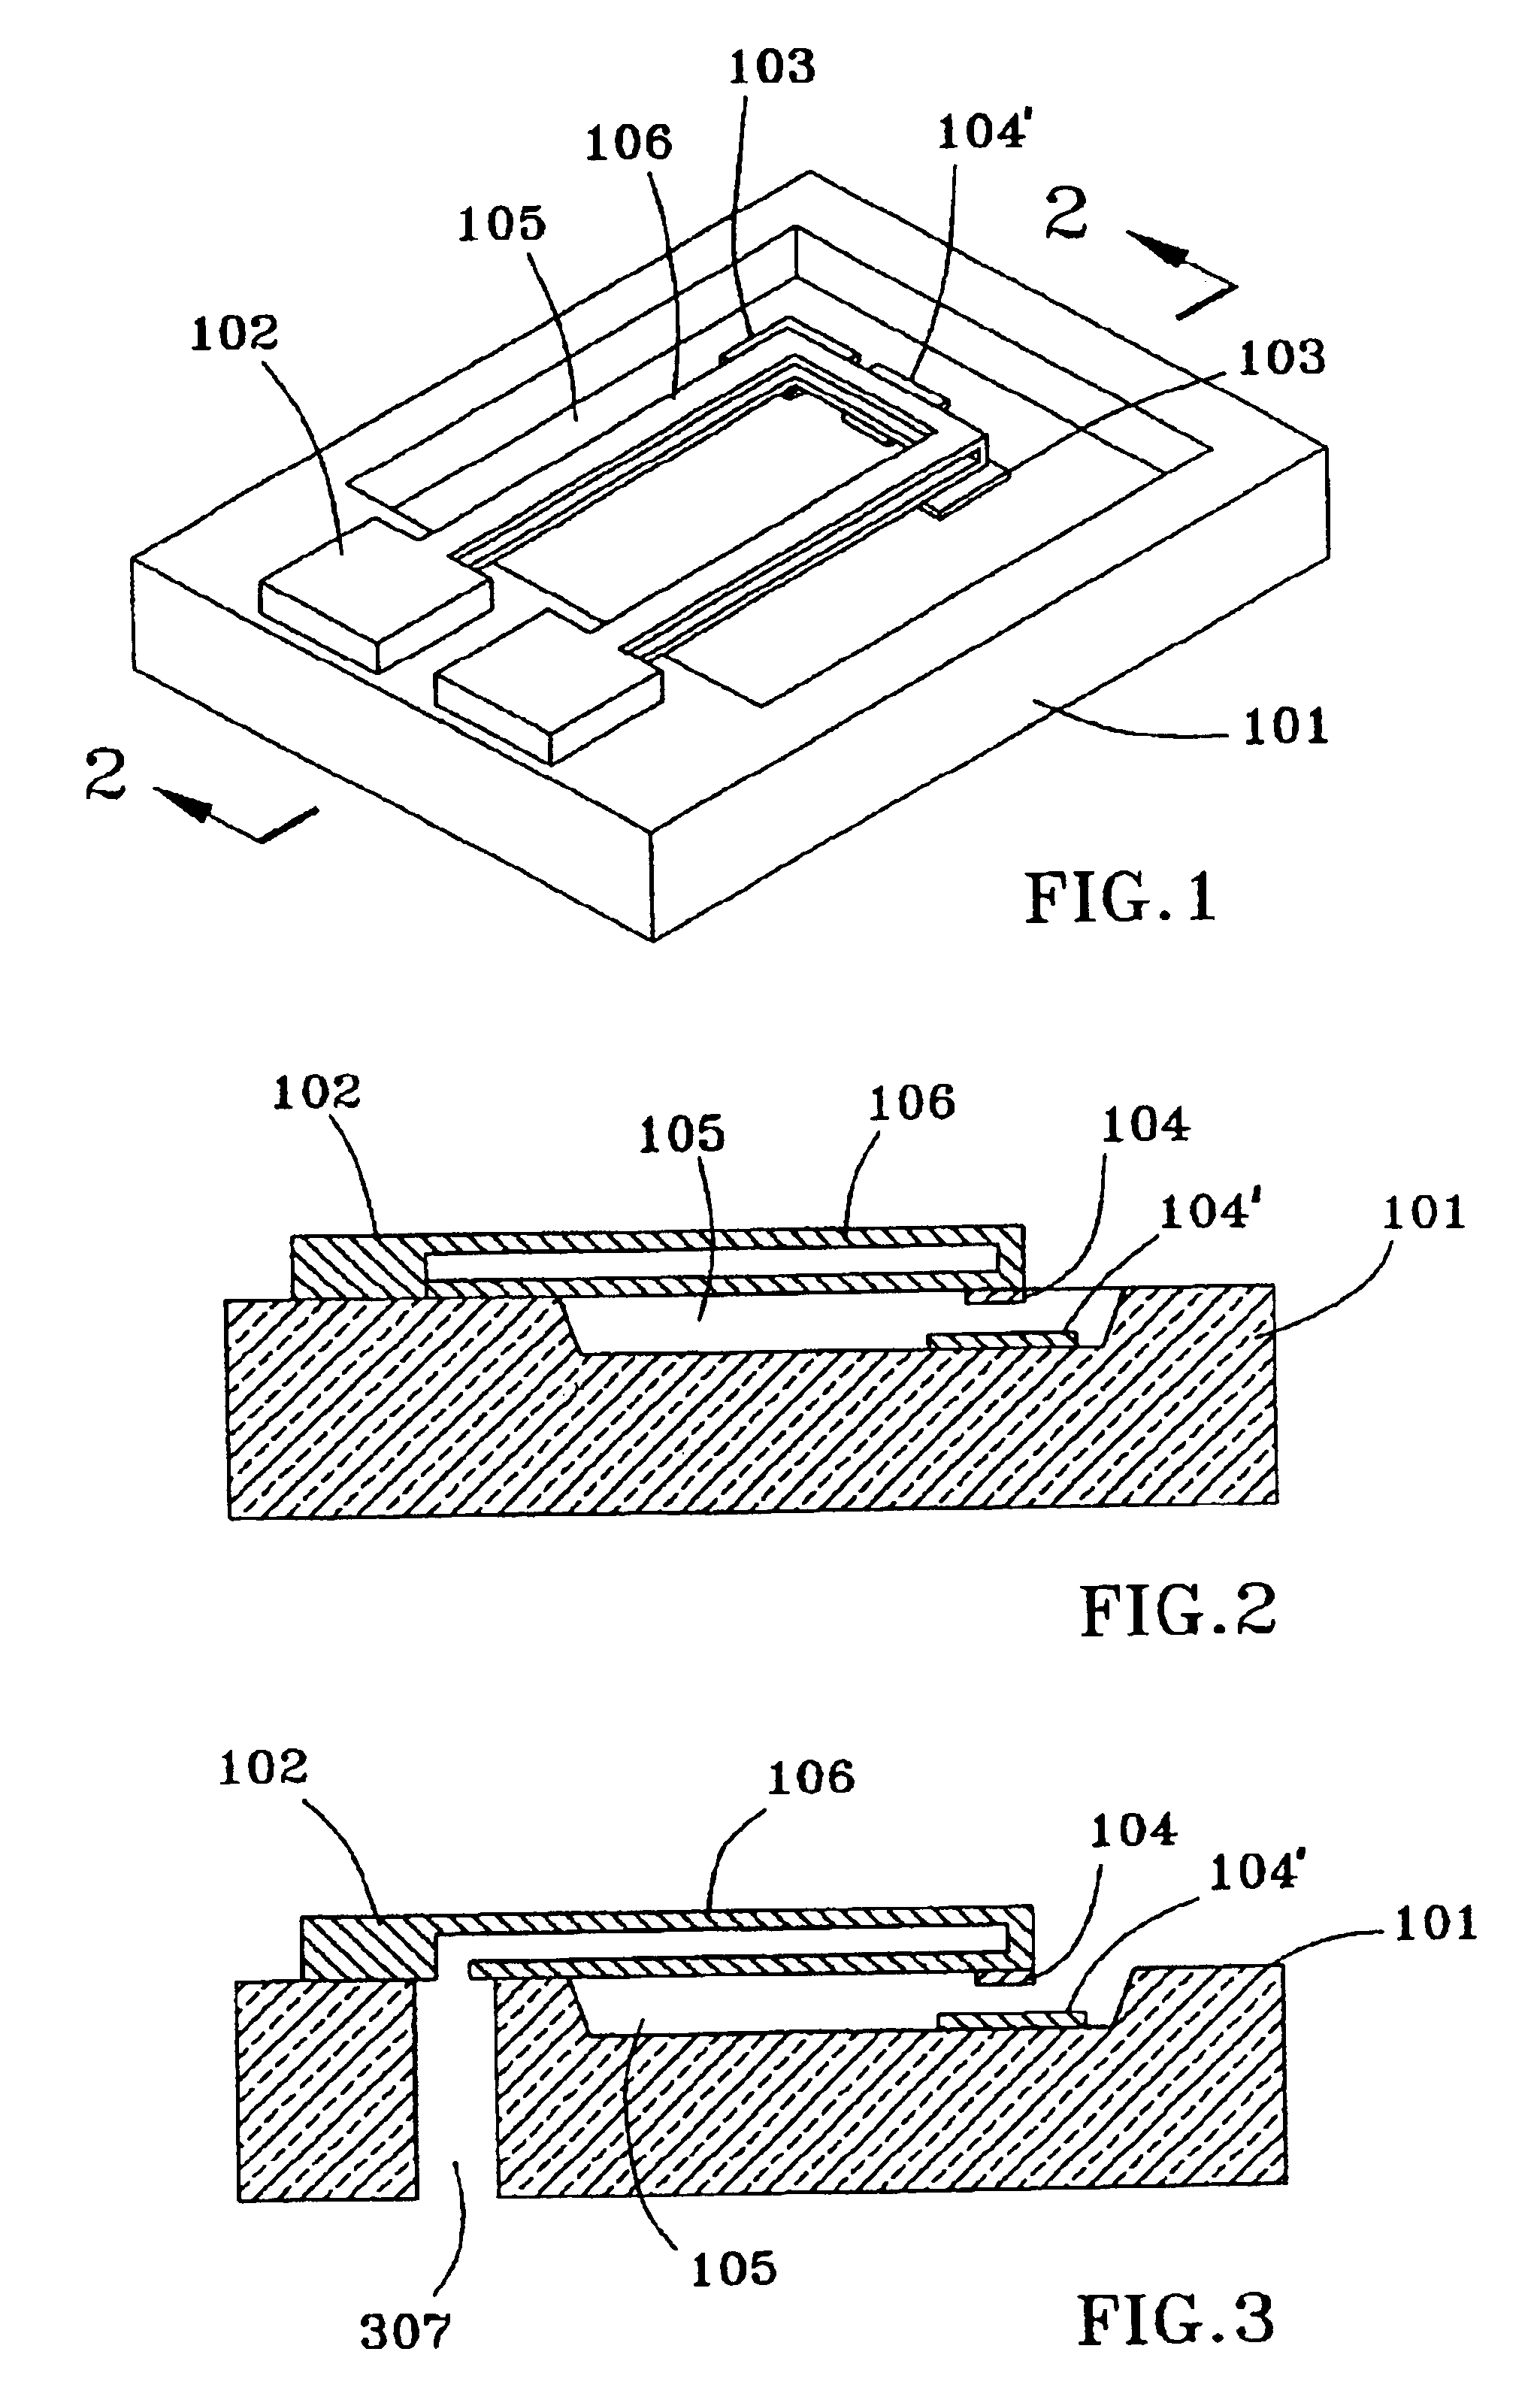 Method of fabricating a micromachined tube for fluid flow